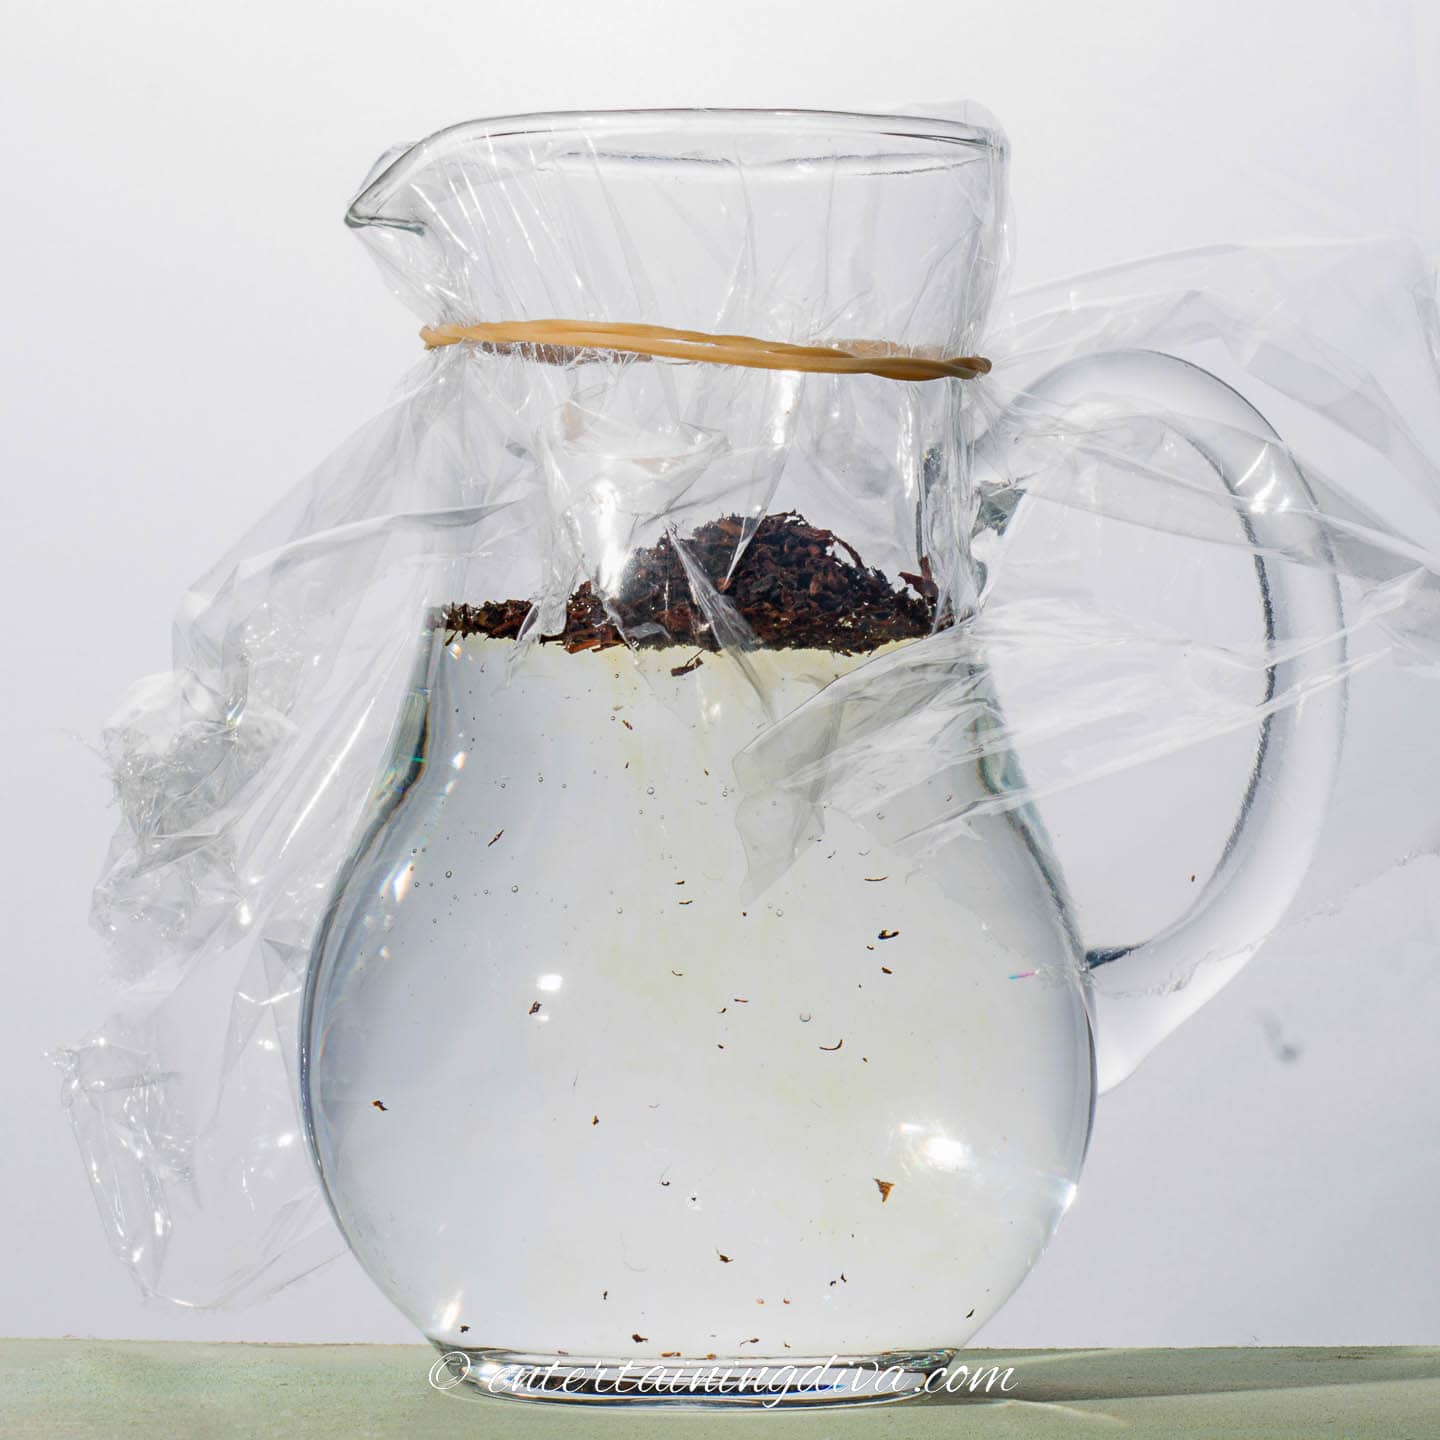 Tea leaves in a pitcher of cold water